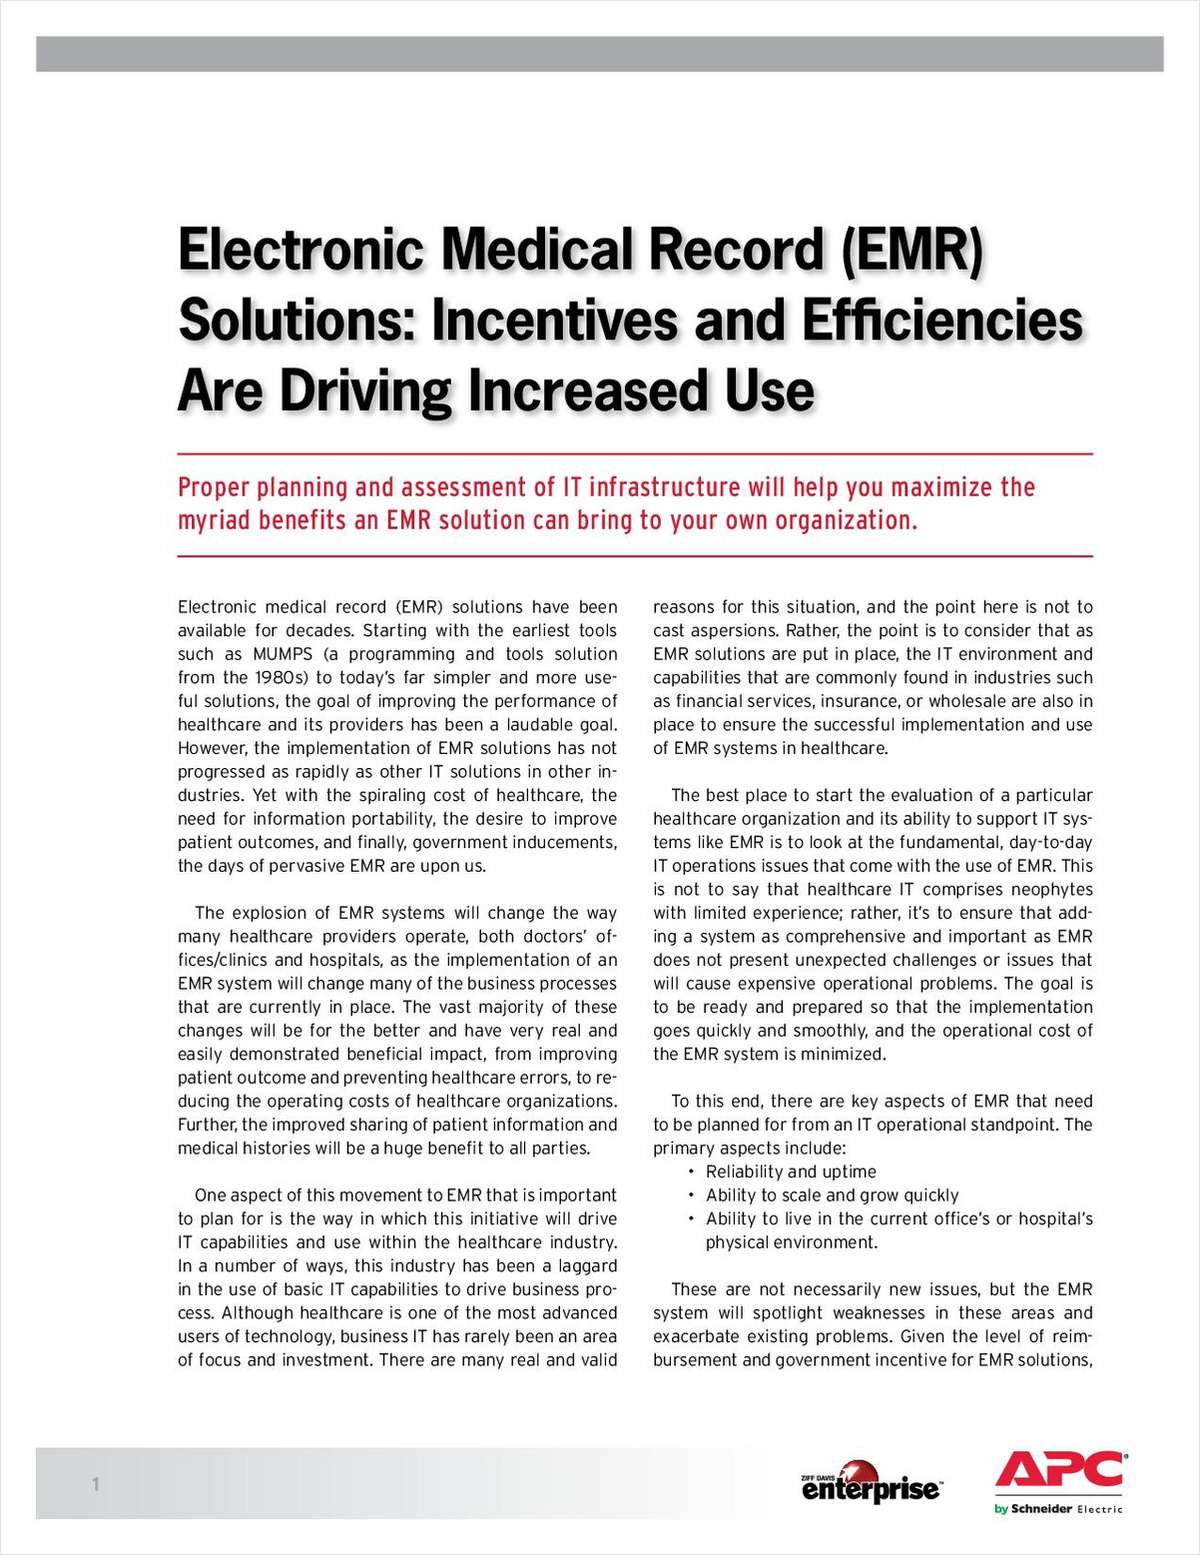 Electronic Medical Record (EMR) Solutions: How Incentives and Efficiencies Are Driving Increased Use